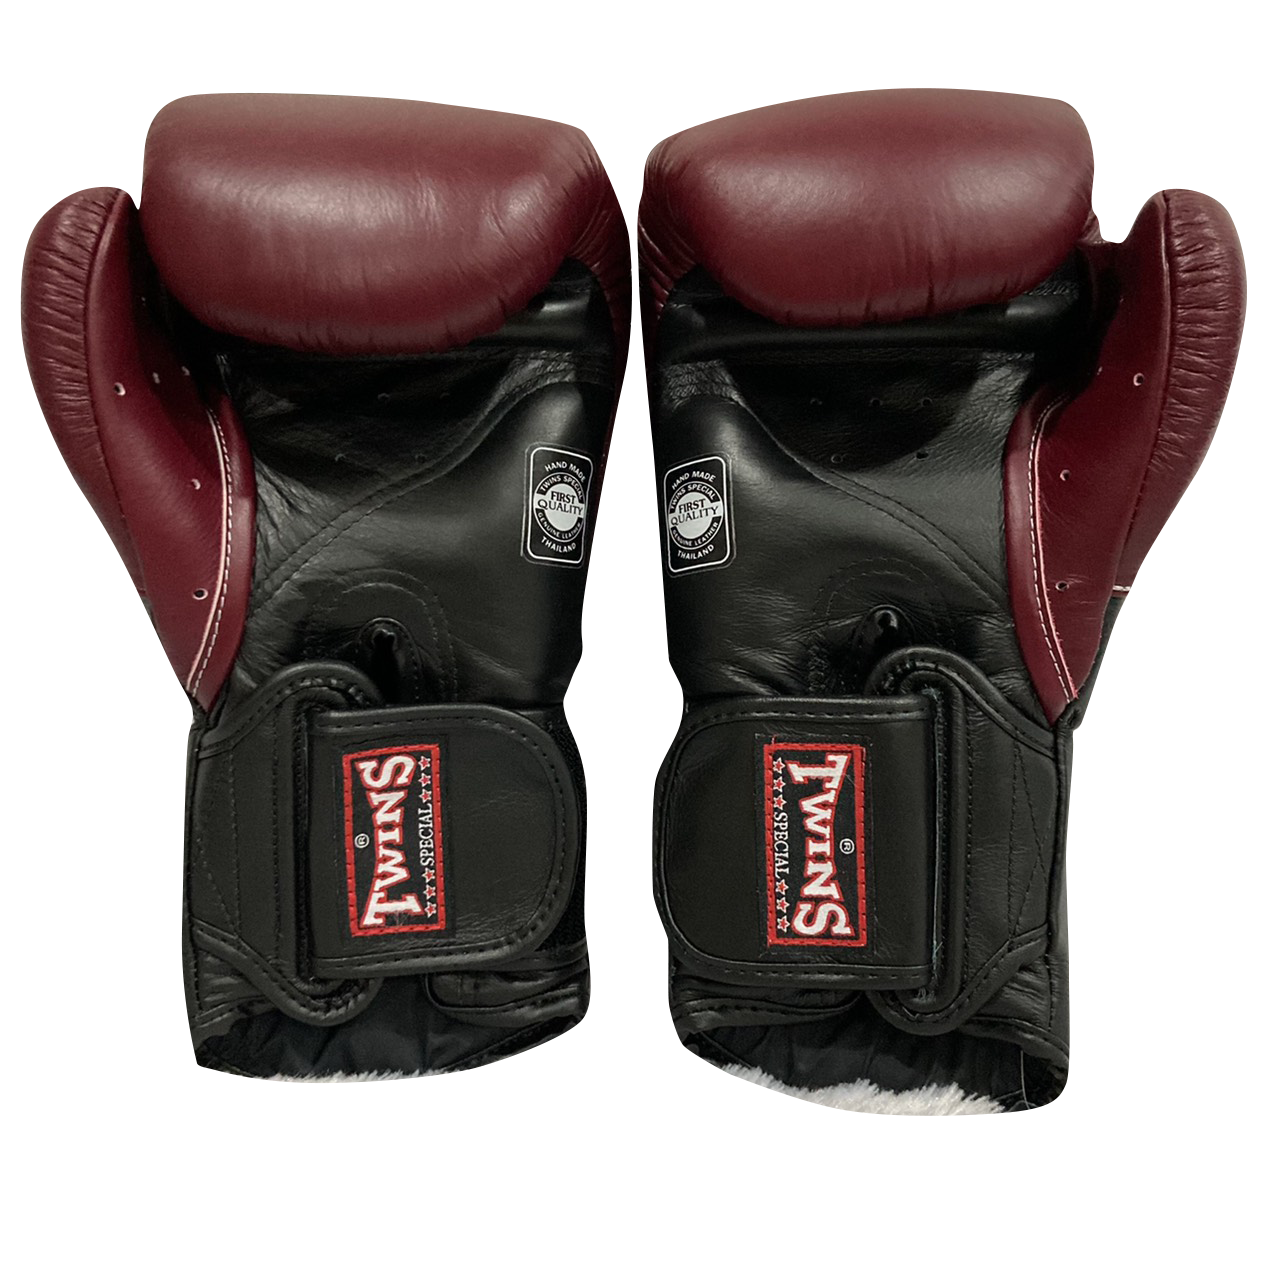 Twins Special Boxing Gloves BGVL6 Black Maroon